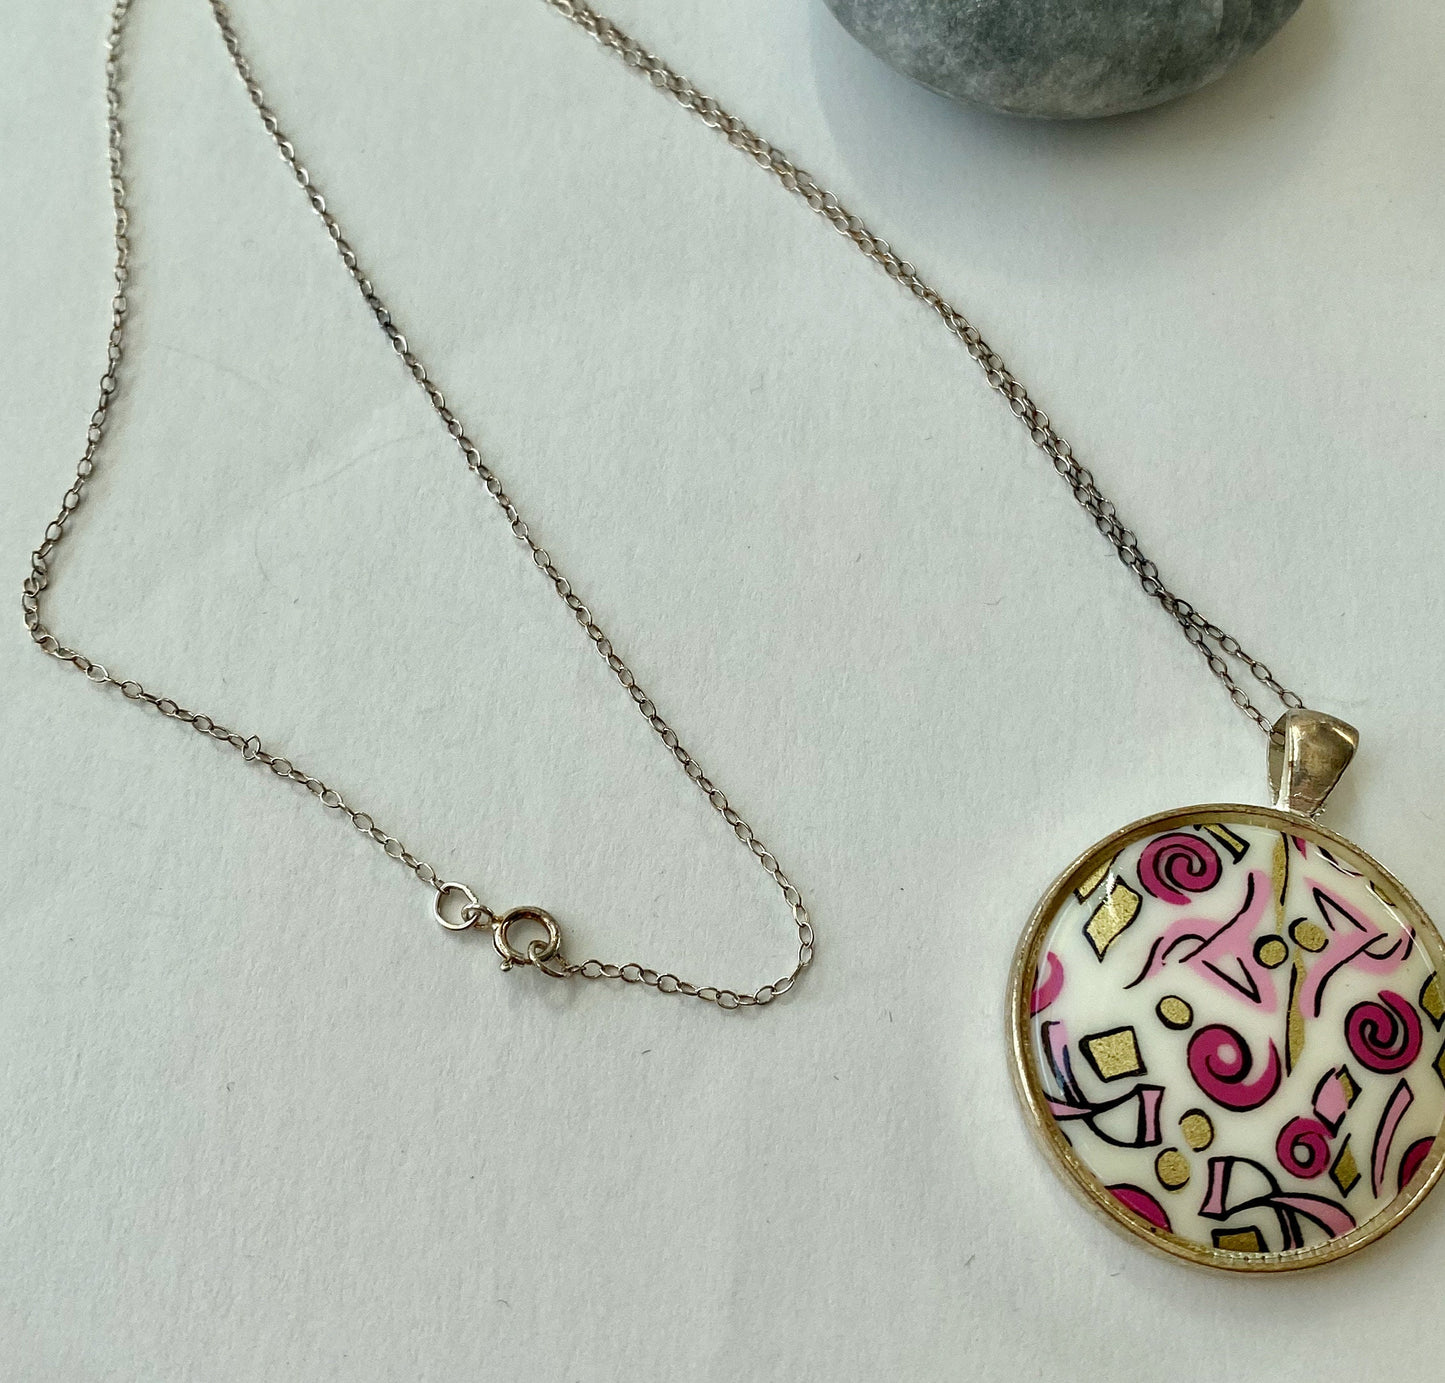 Beautiful retro look pendant.  Set in a silver bezel on a sterling silver chain. Pink and gold fun design.